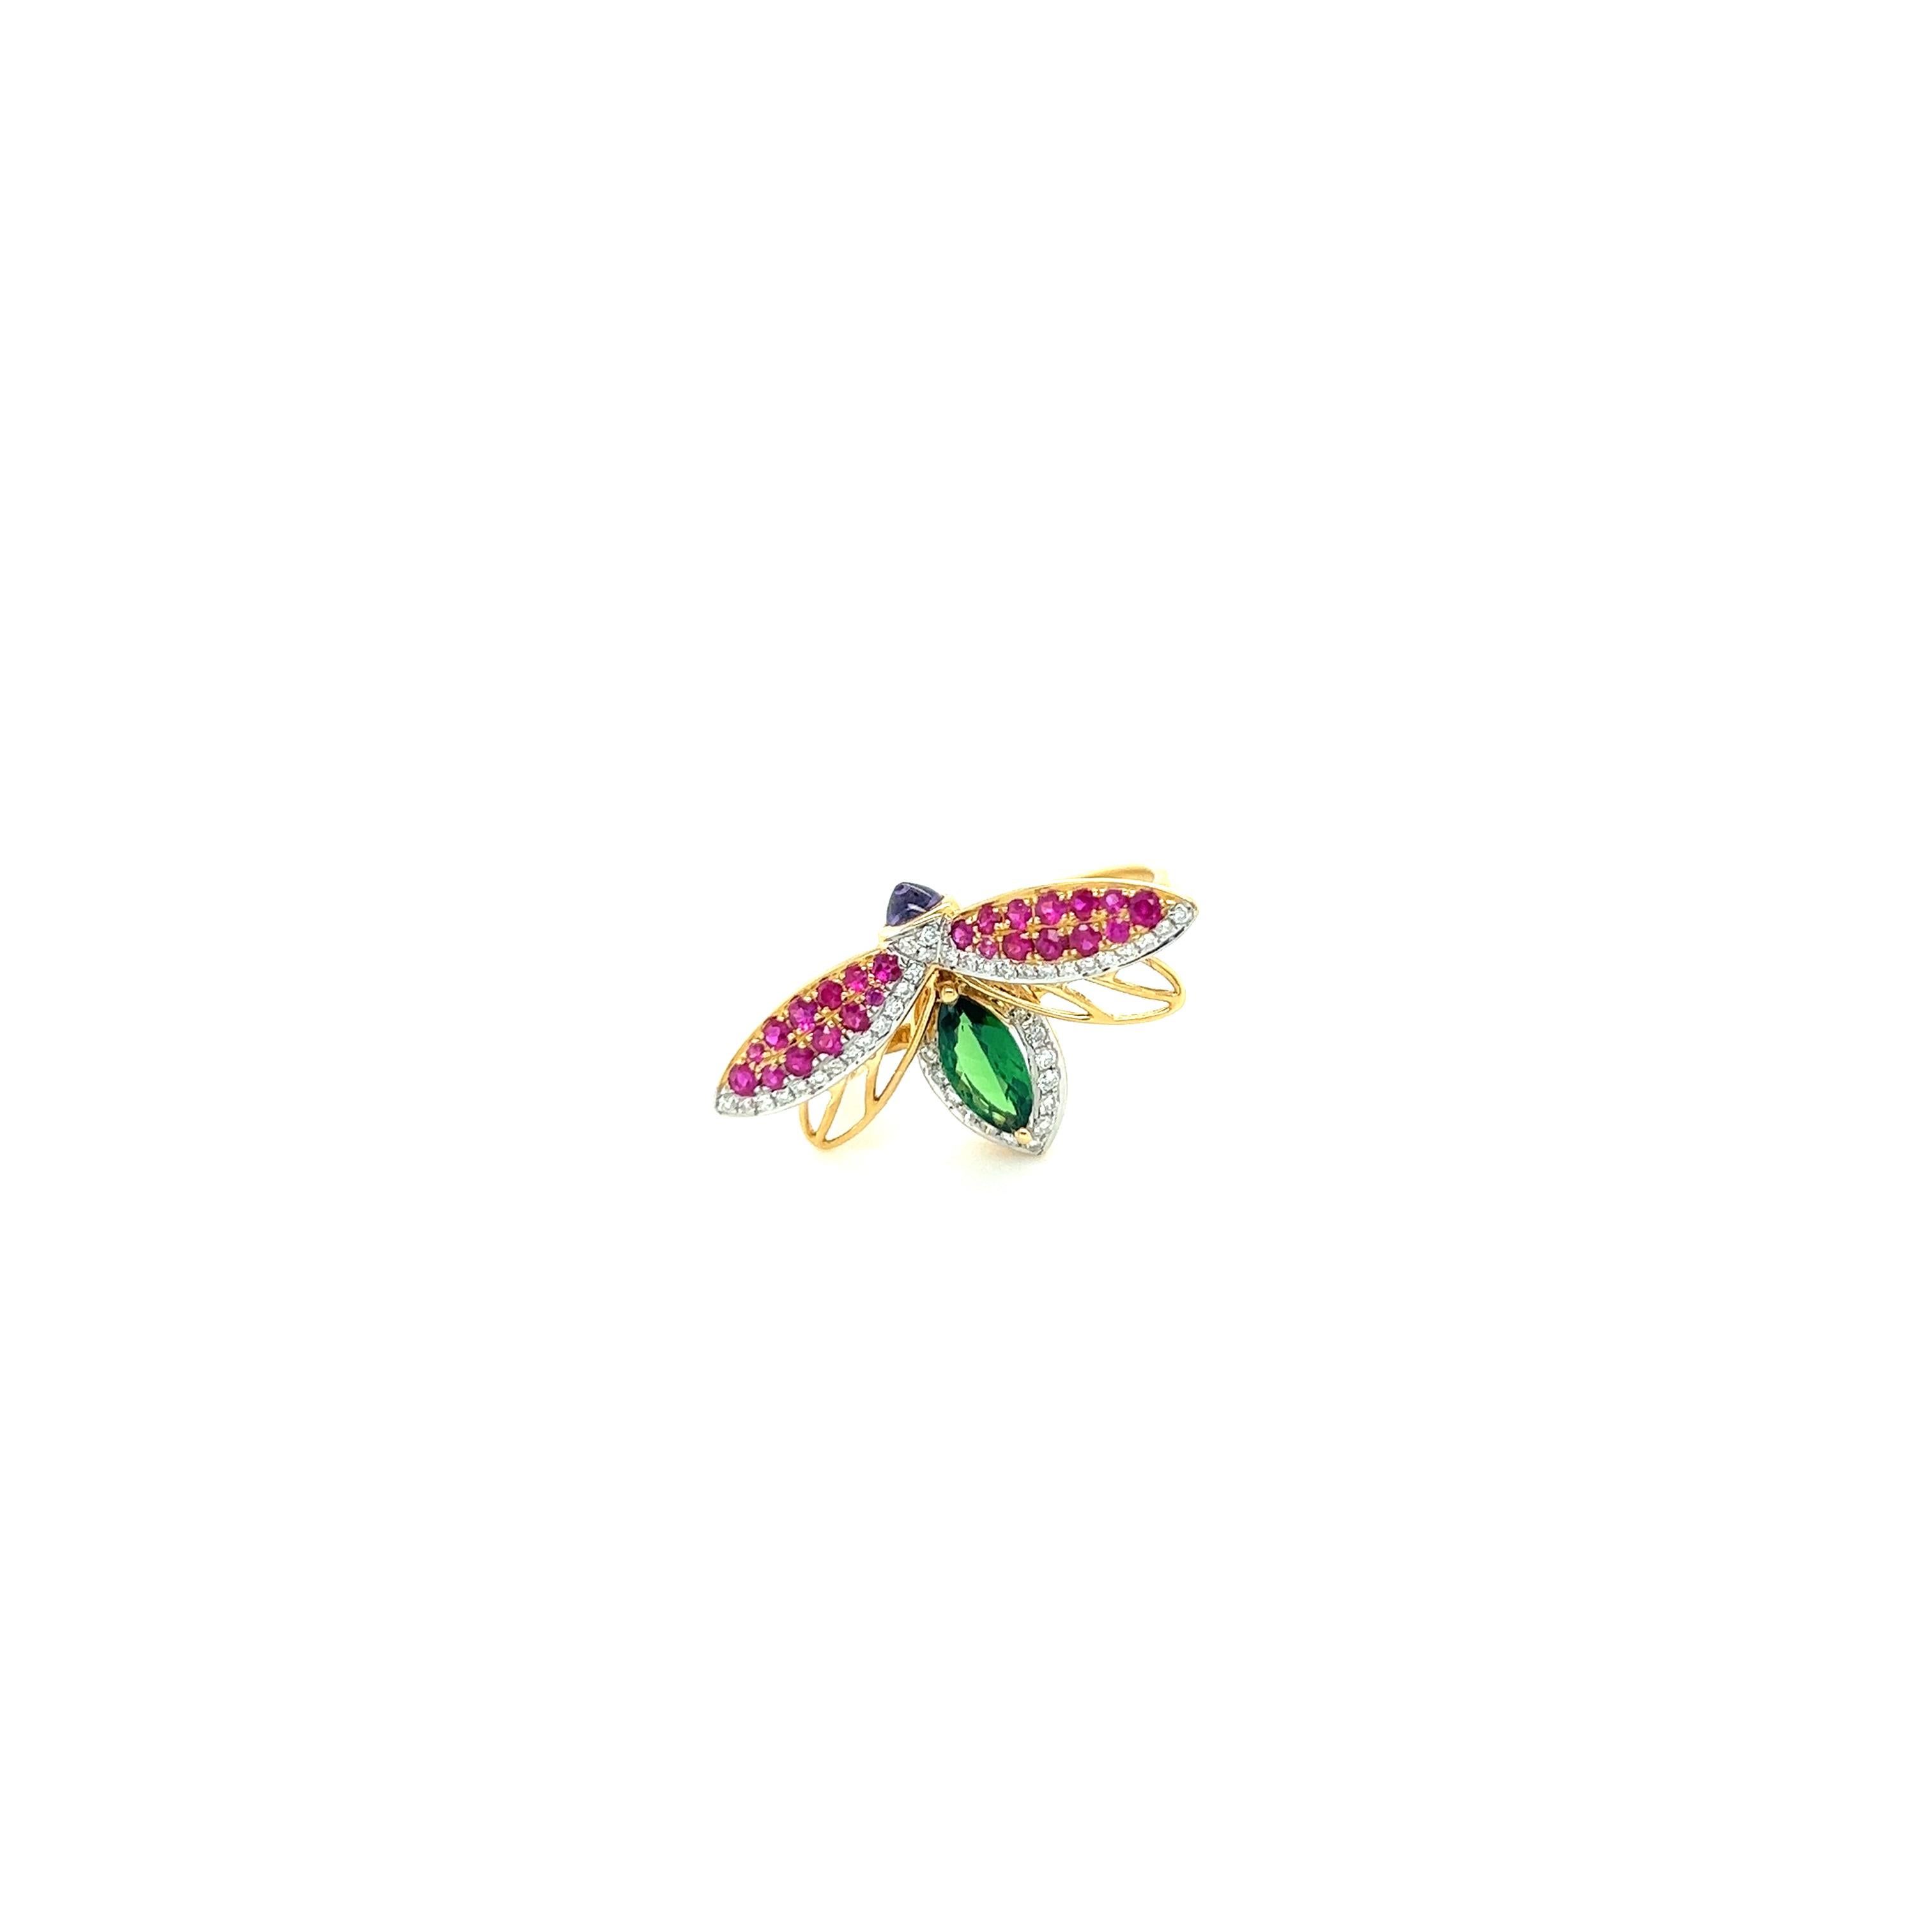 18 K Yellow Gold Ruby Bee Ring

42 Diamonds 0.15CT
1 Green Garnet 0.43CT
1 Purple Sapphire 0.23CT
24 Rubies 0.34CT
18K Yellow Gold 4.04GM

Ruby jewelry is rich in all the connotations of love and heat and opulence. This bright red stone brings